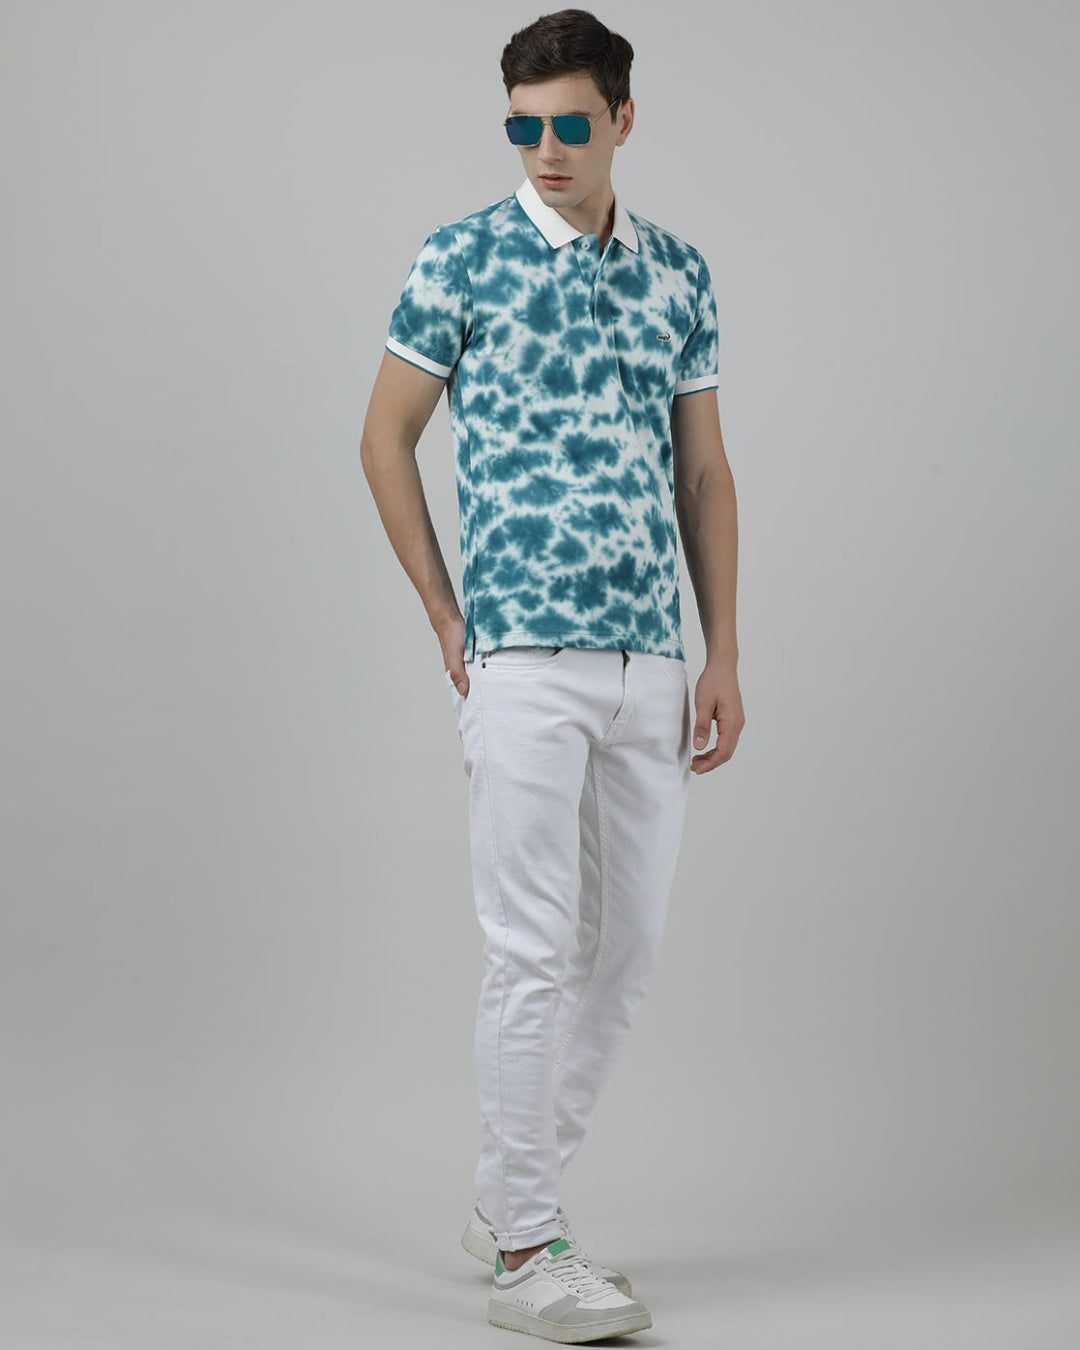 Crocodile Casual Verdigris T-Shirt Tie and Dye Half Sleeve Slim Fit with Collar for Men